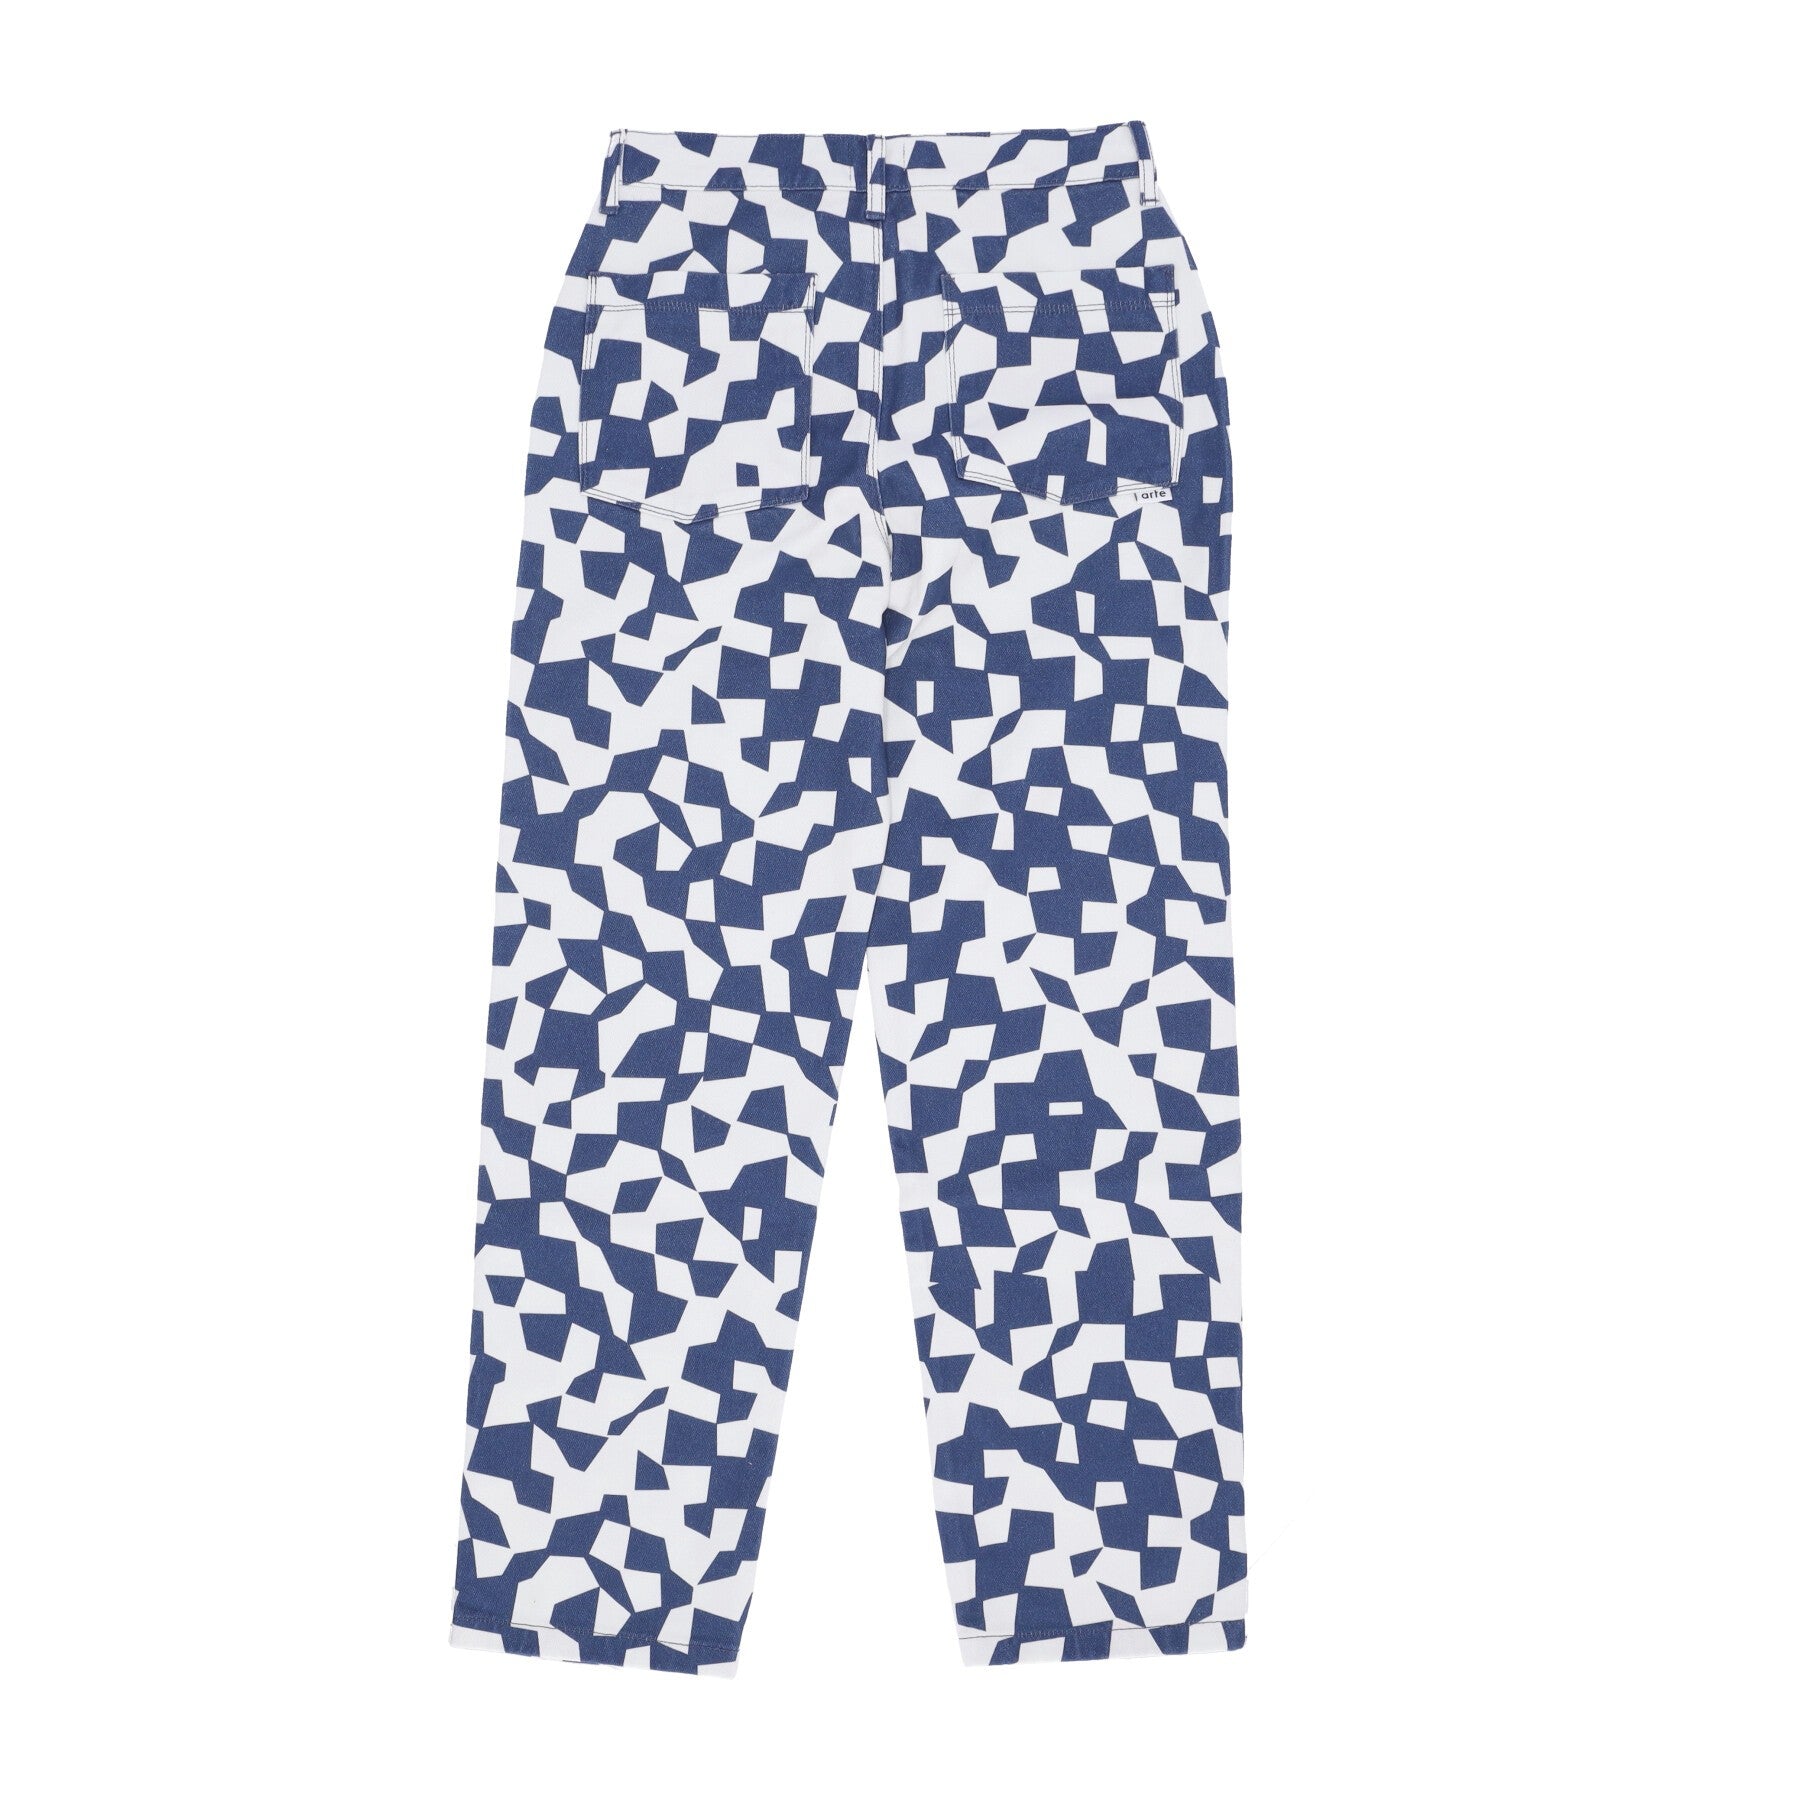 Paul Abstract Pants Navy/white men's long trousers